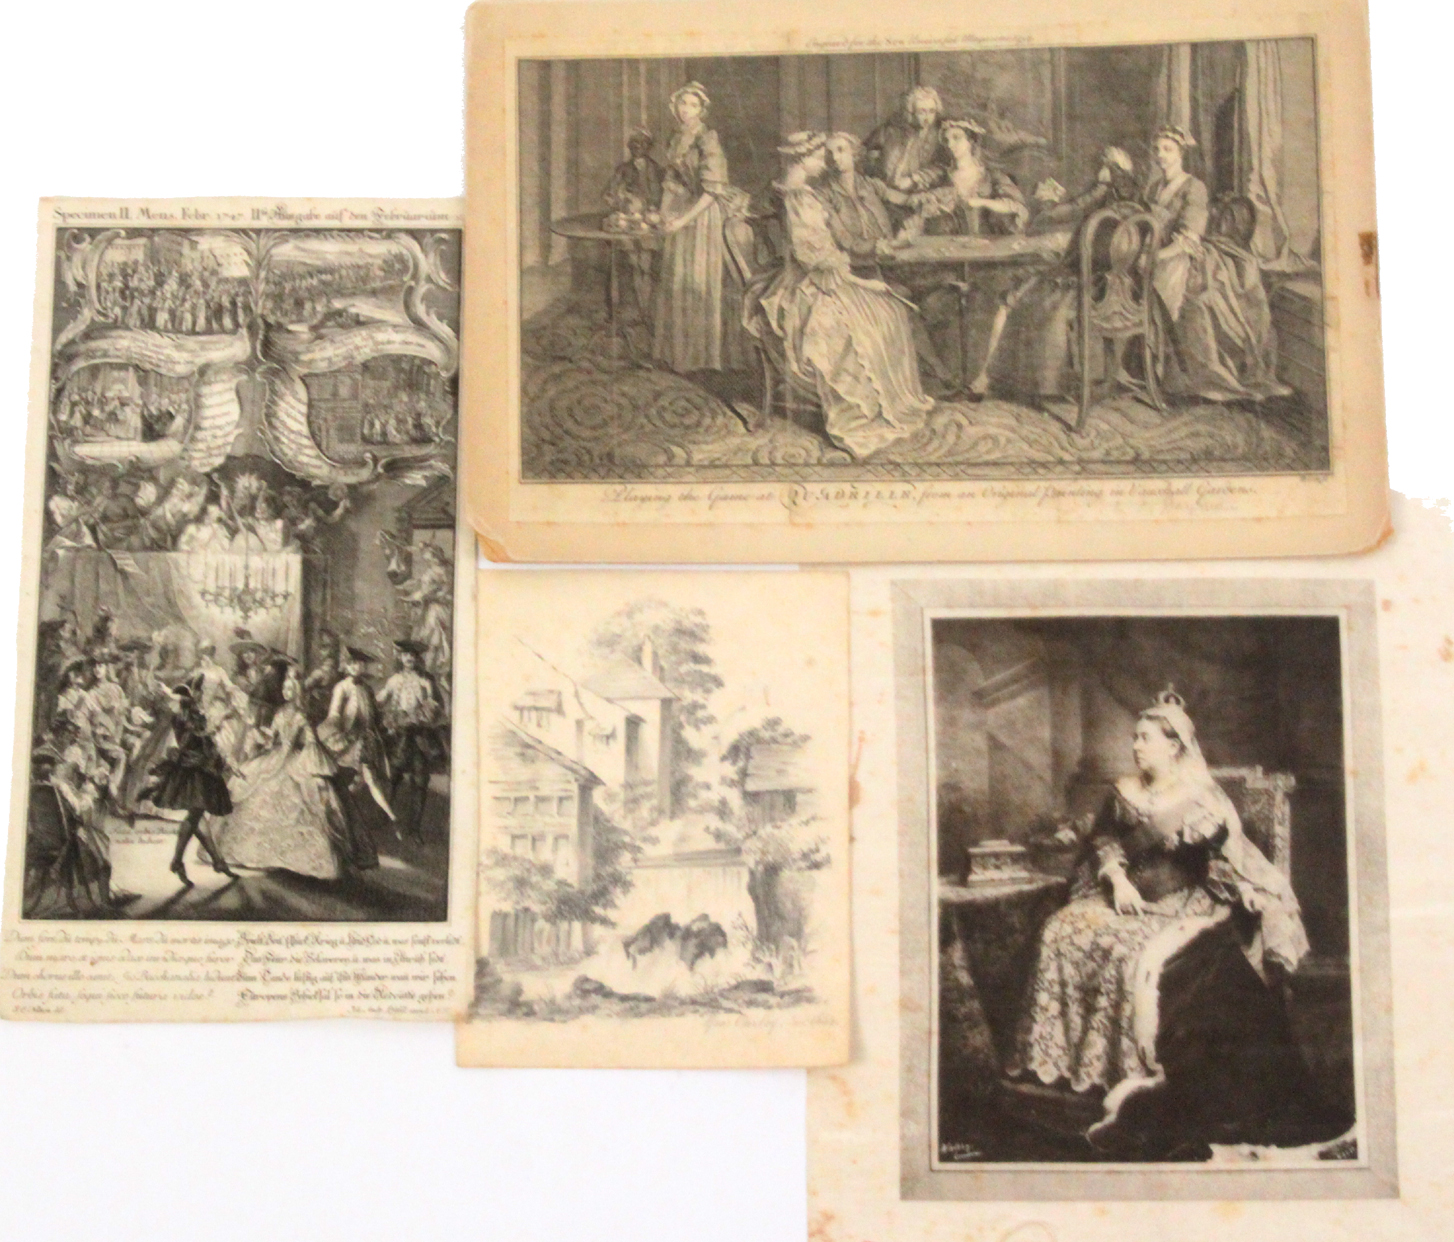 Prints comprising an engraving after J.E. Nilsson (1721-1788) depicting and 18th Century dance scene